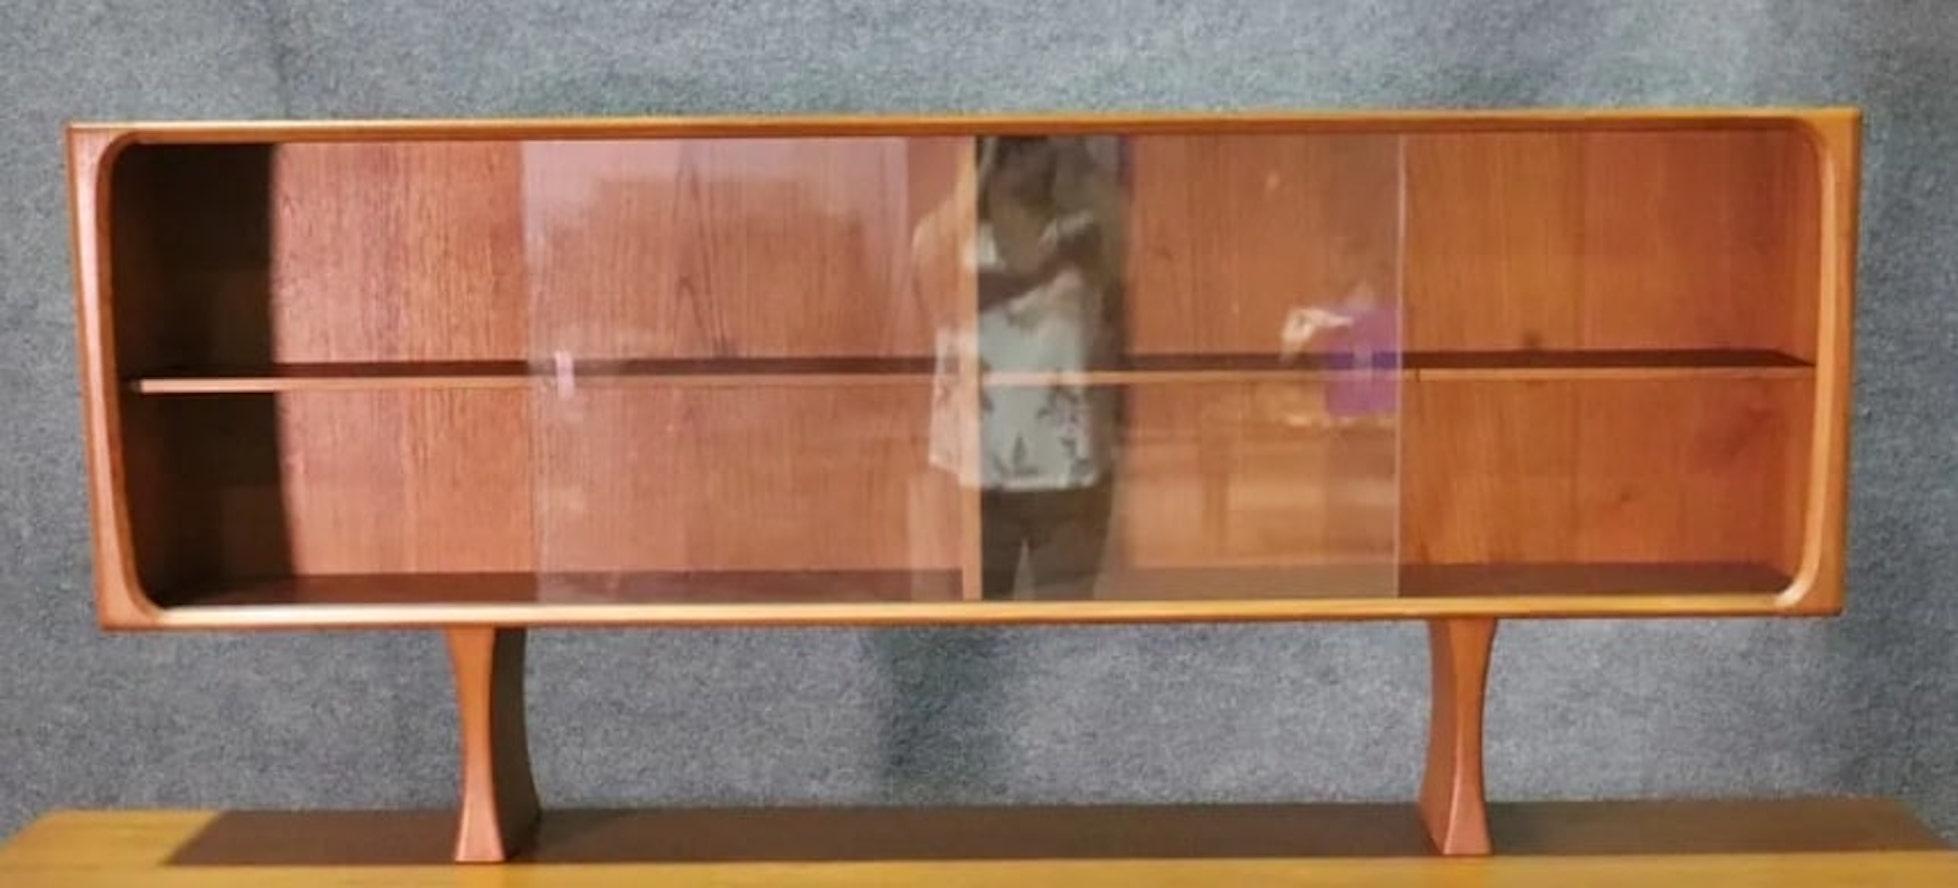 Mid-century modern low cabinet with two sliding glass doors. The frame is made of teak wood and makes for a sleek TV console or dry bar.
Please confirm location NY or NJ